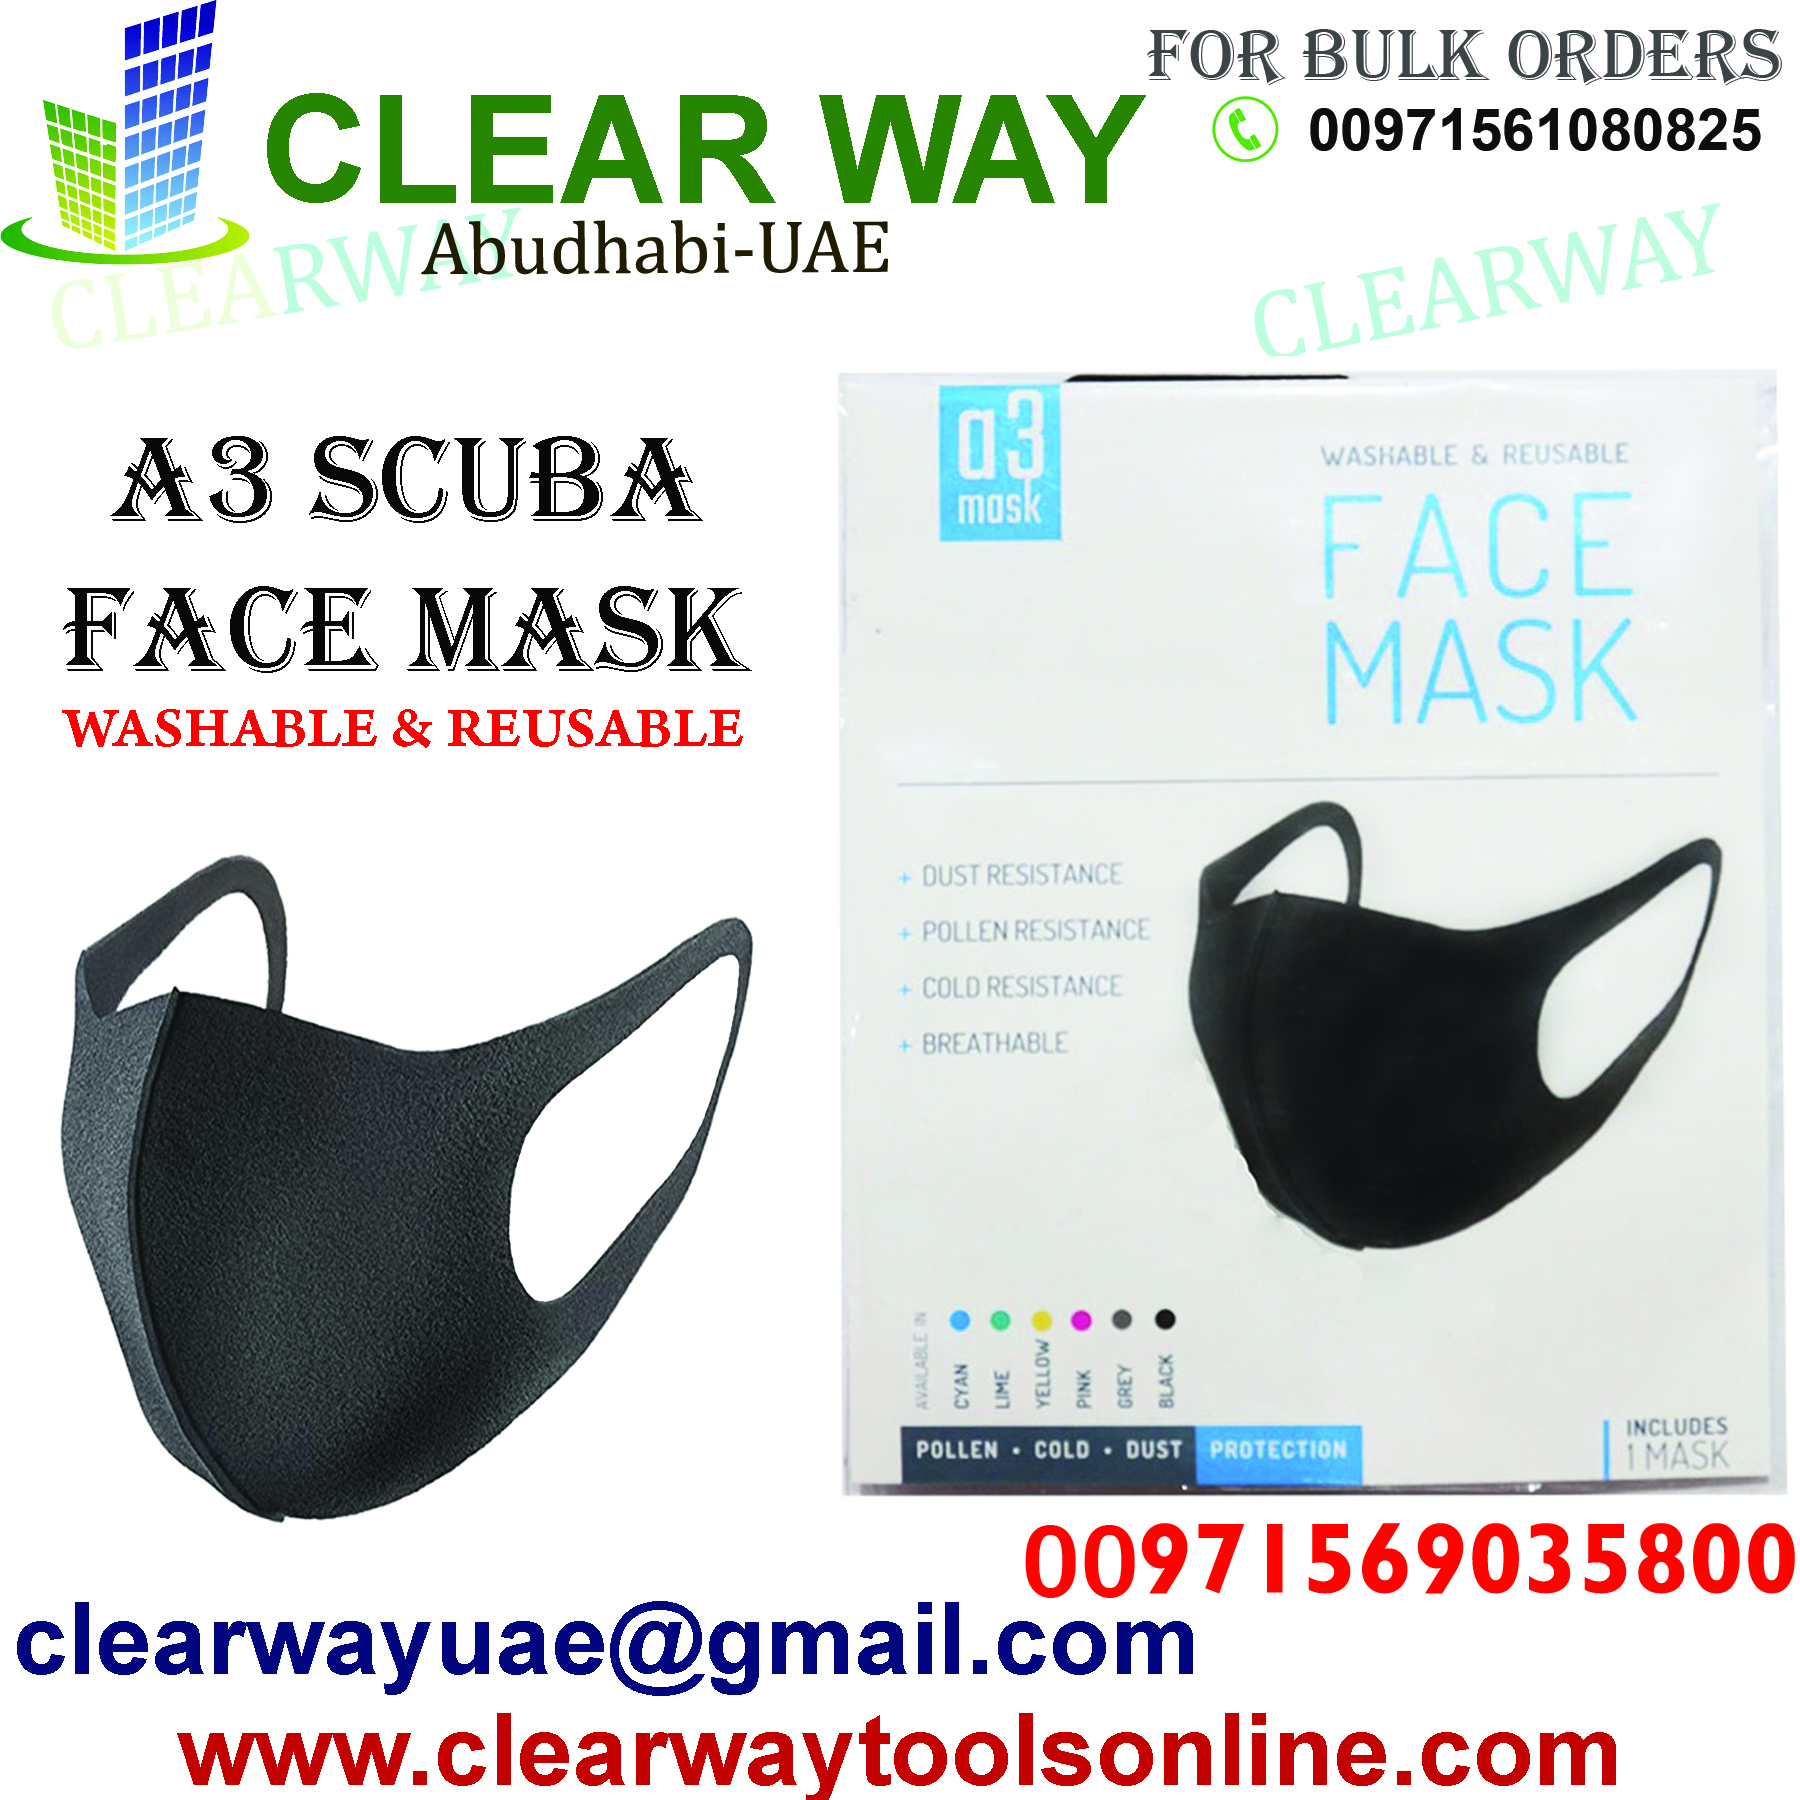 WASHABLE AND REUSABLE A3 SCUBA FACEMASK DEALER IN MUSSAFAH , ABUDHABI , UAE BY CLEARWAY